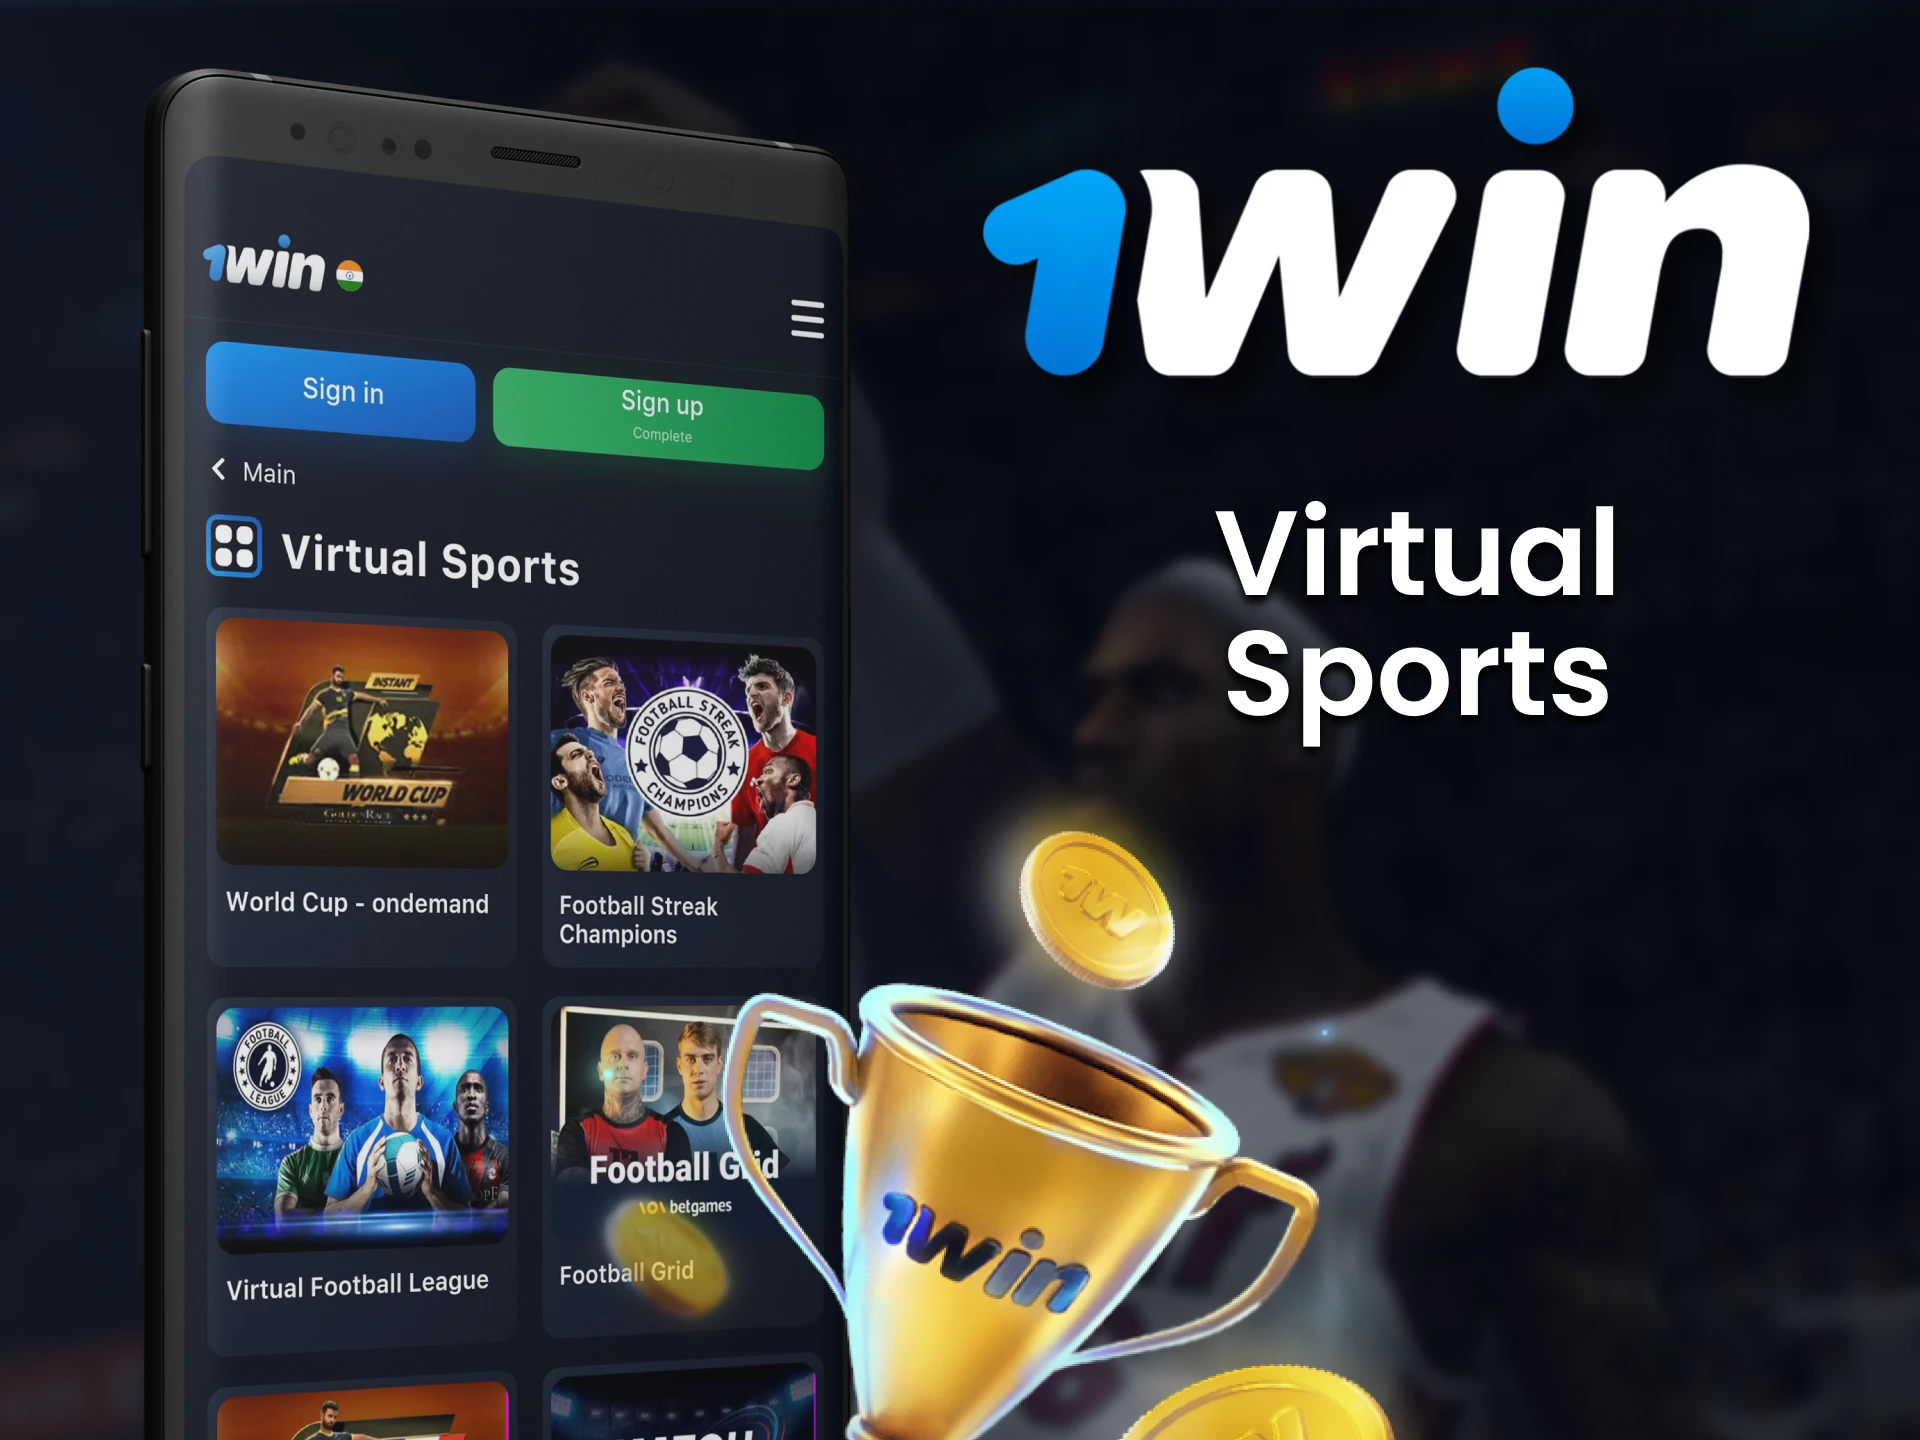 Place bets on virtual sport through the 1win app.